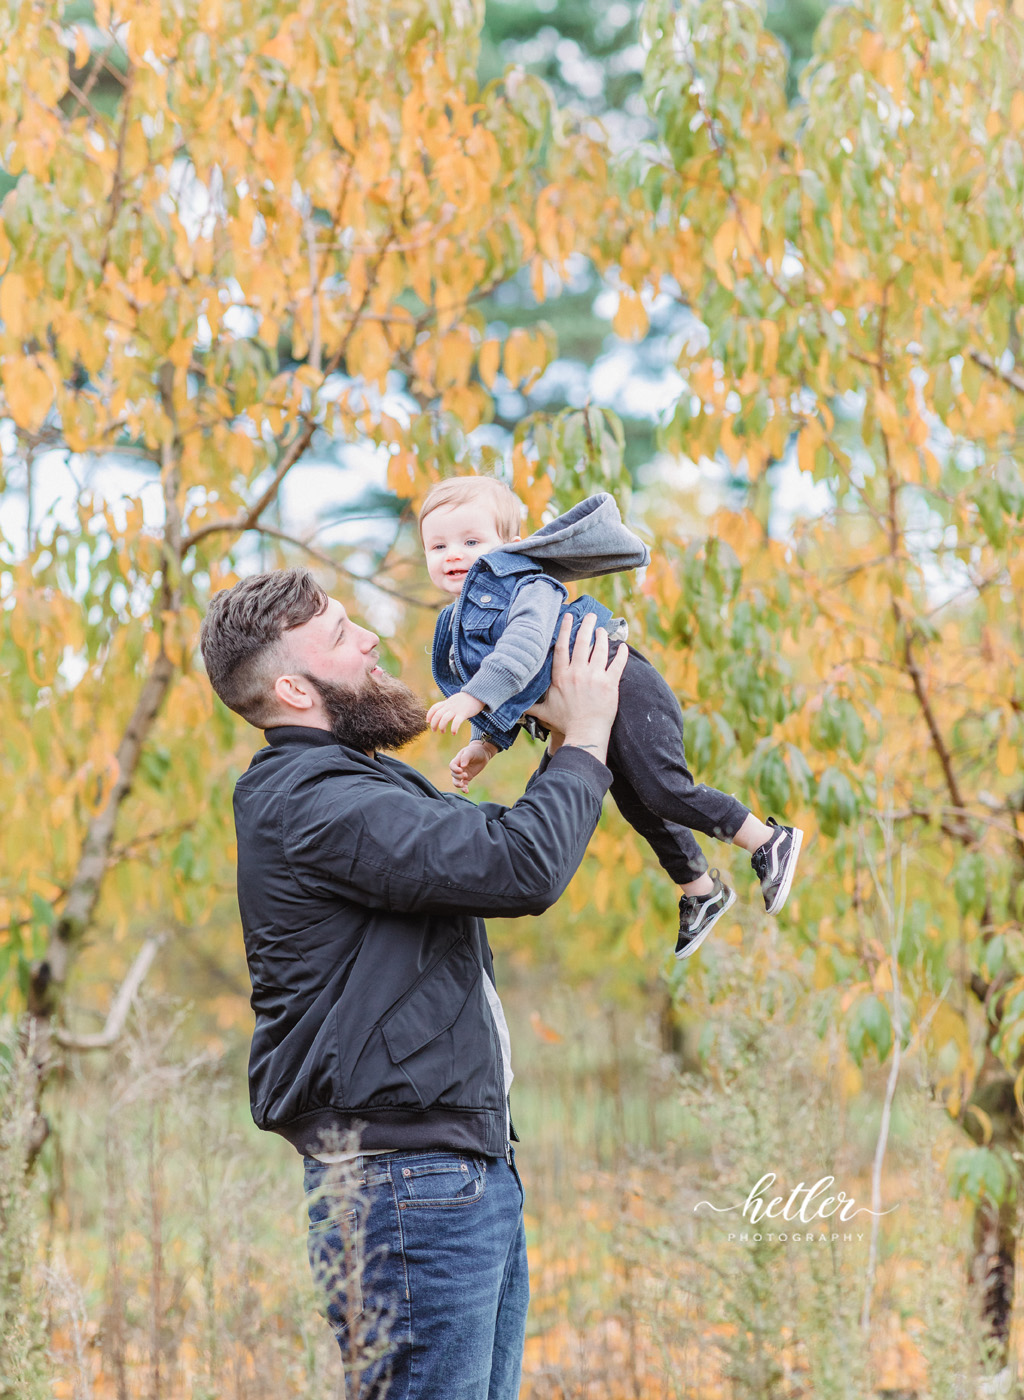 Rockford Michigan fall family photos at Grange Fruit Farm in the apple orchard